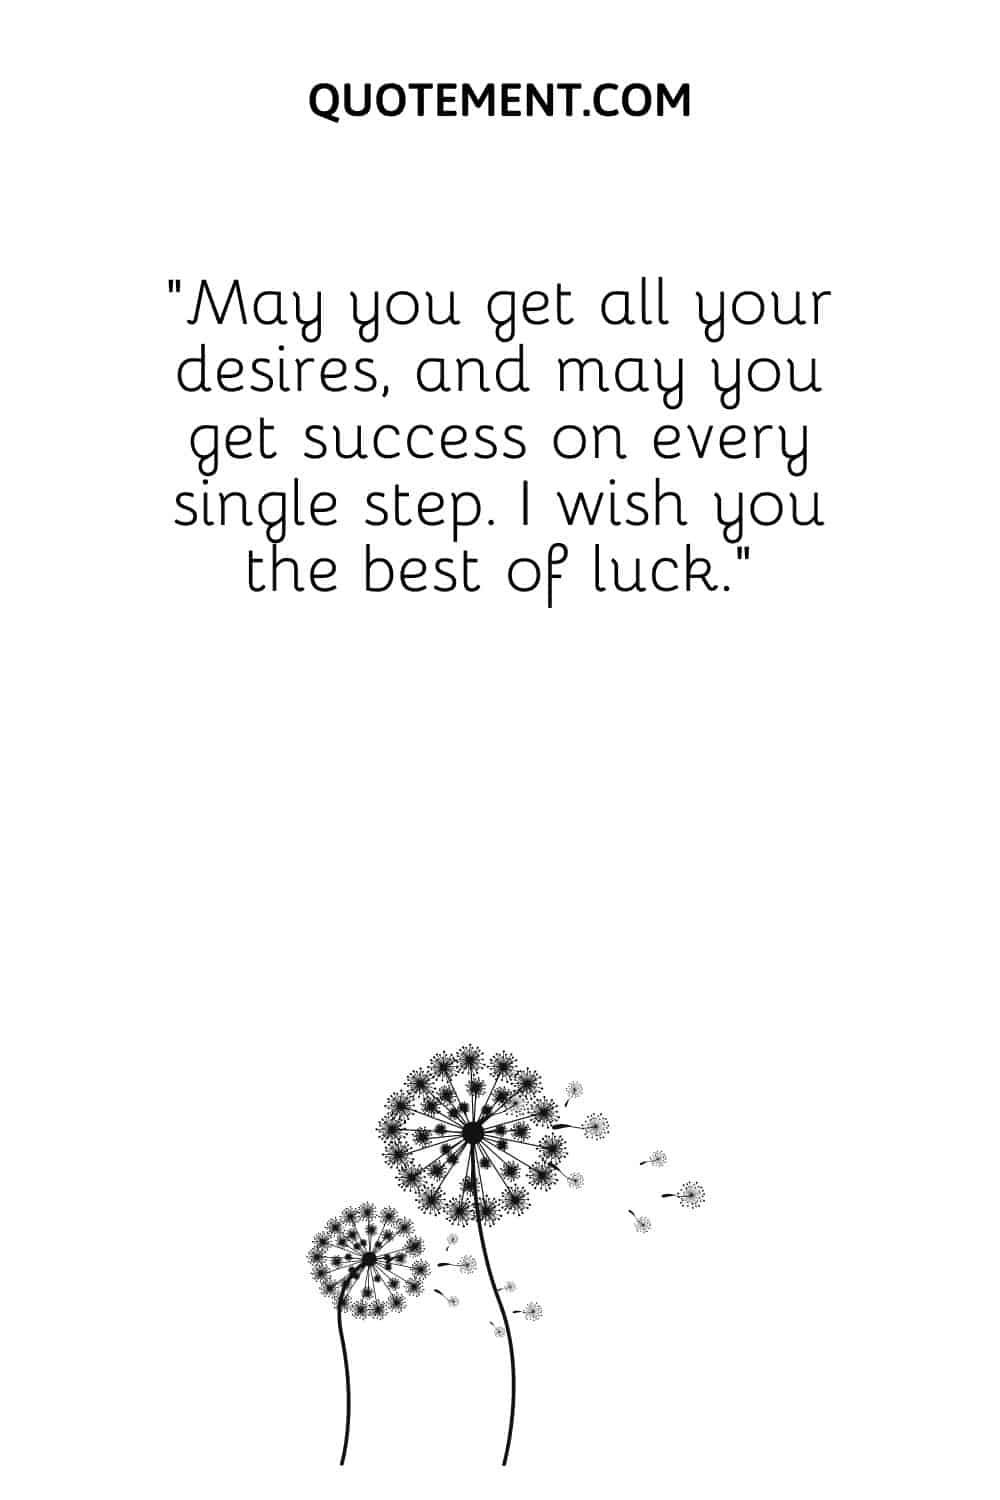 May you get all your desires, and may you get success on every single step